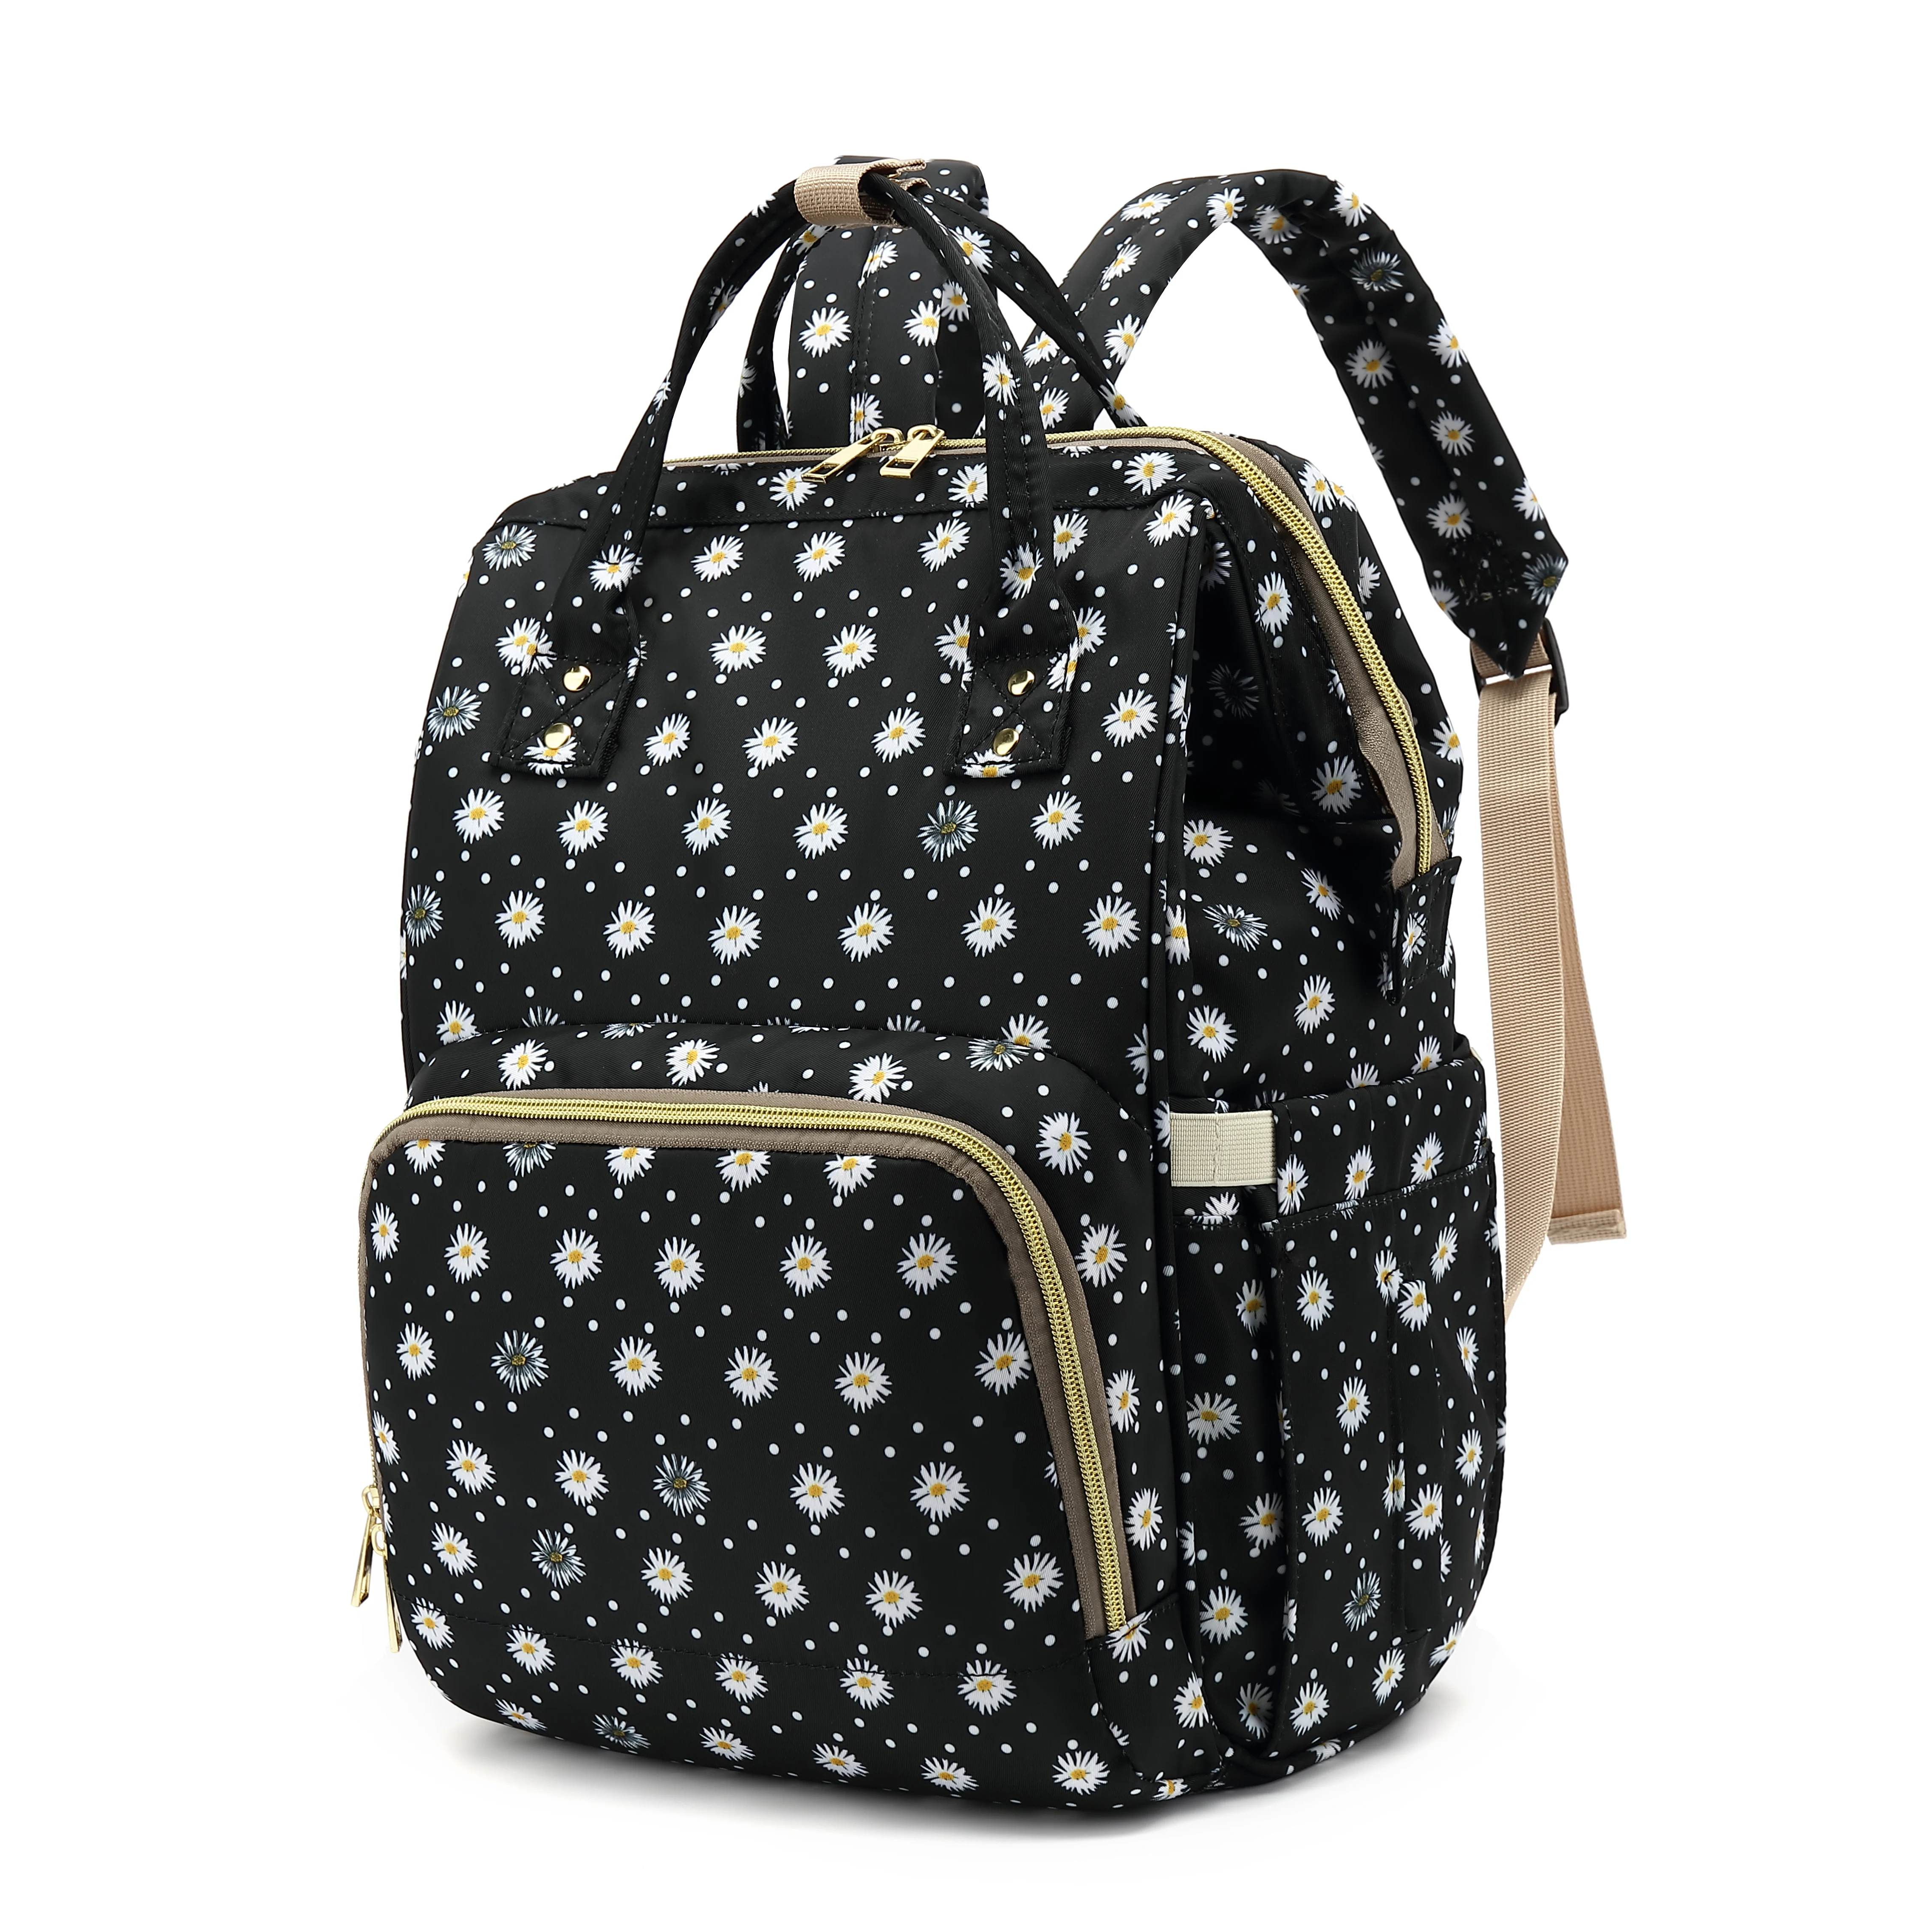 

Amazon Selling Leopard Daisy Cactus Printing Diaper Bag Large Capacity Waterproof Nursing Backpacks Nappy Bags for Mom